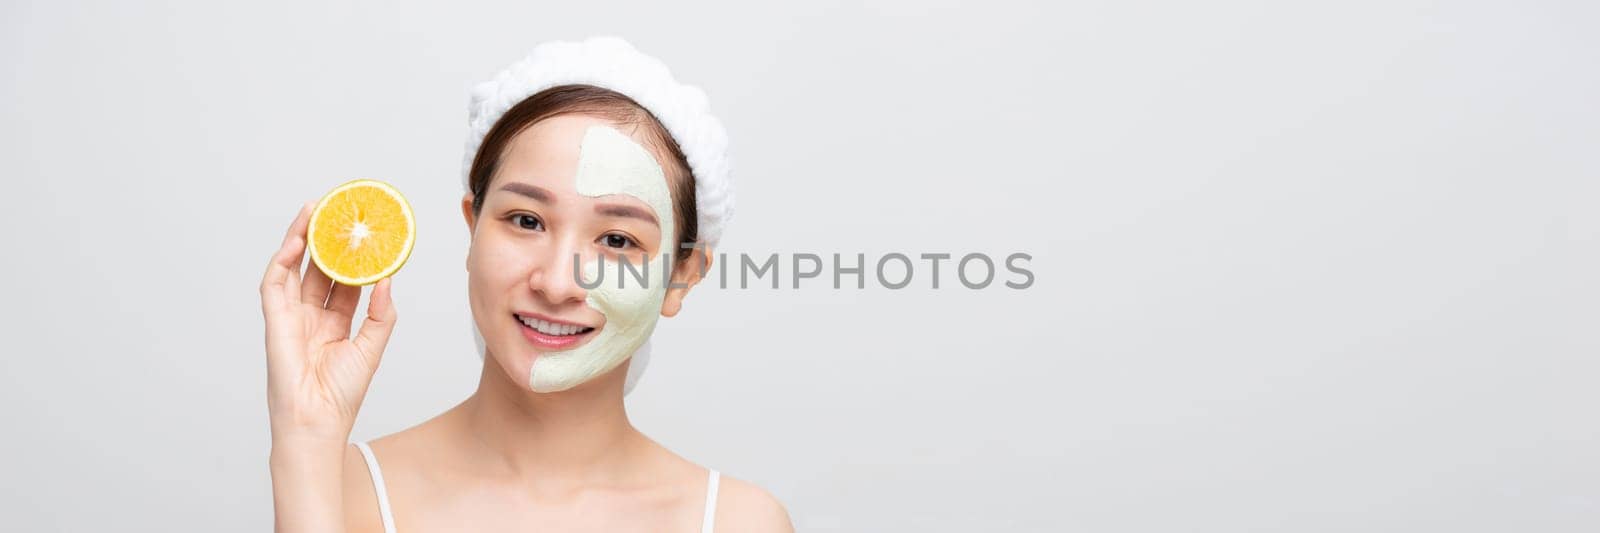 Emotional young woman with facial mask and halves of ripe orange on white background. Web banner. by makidotvn